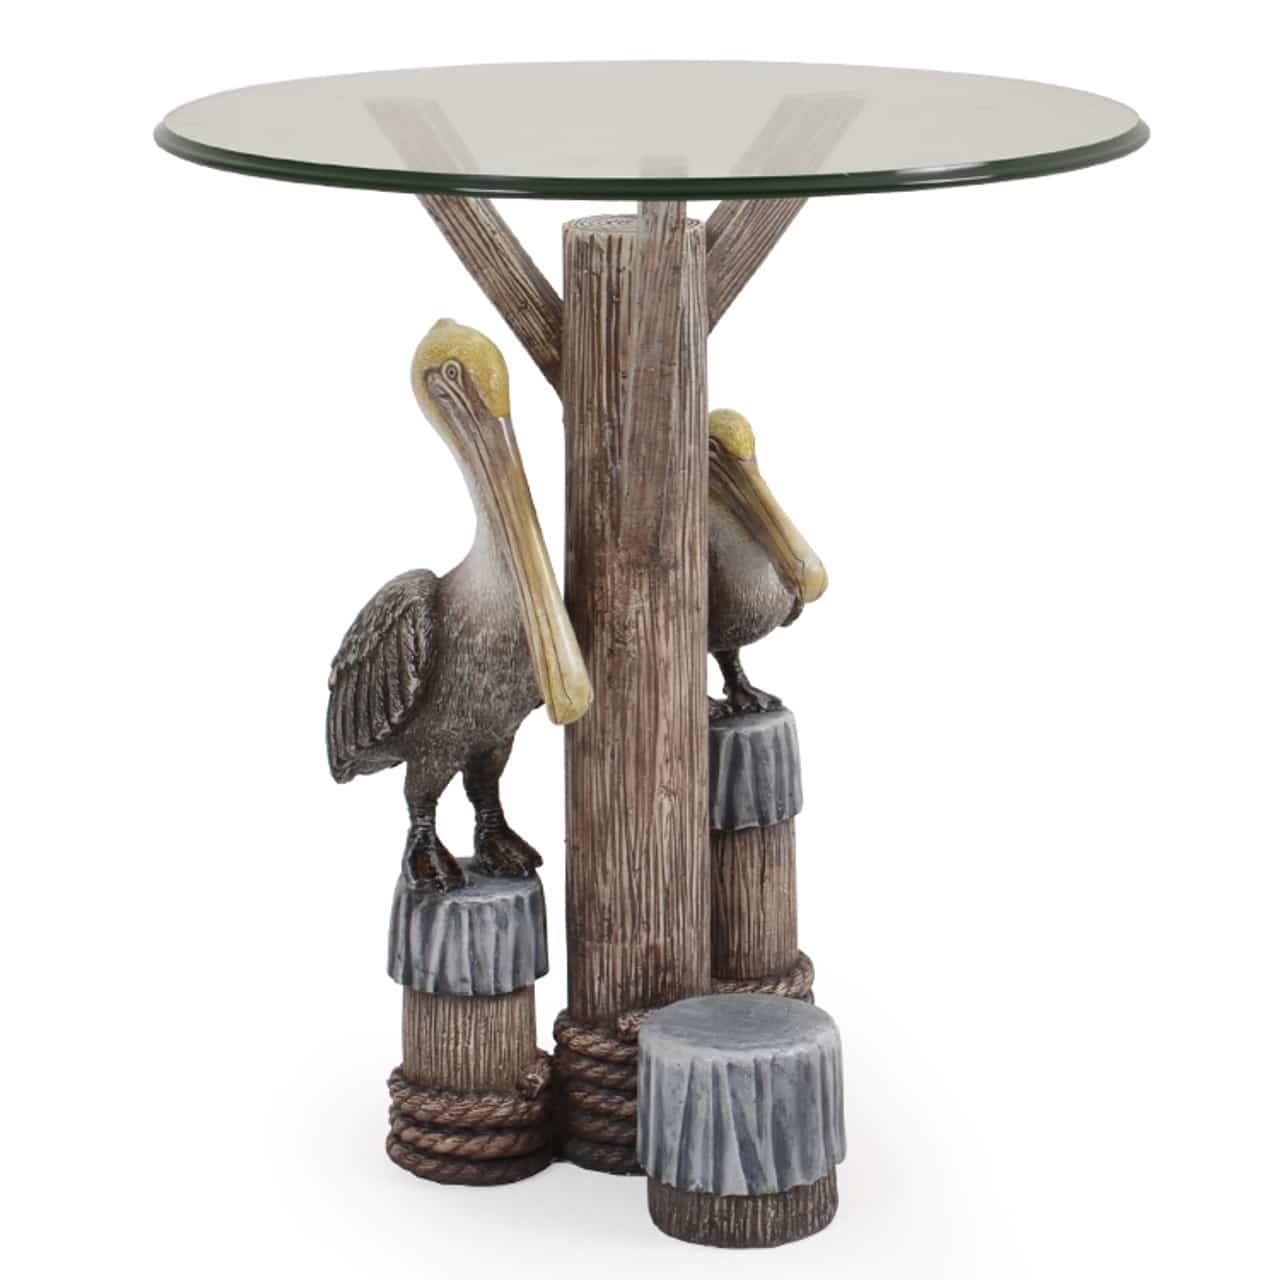 Pelican Hand Painted Resin Coastal Style Side Table